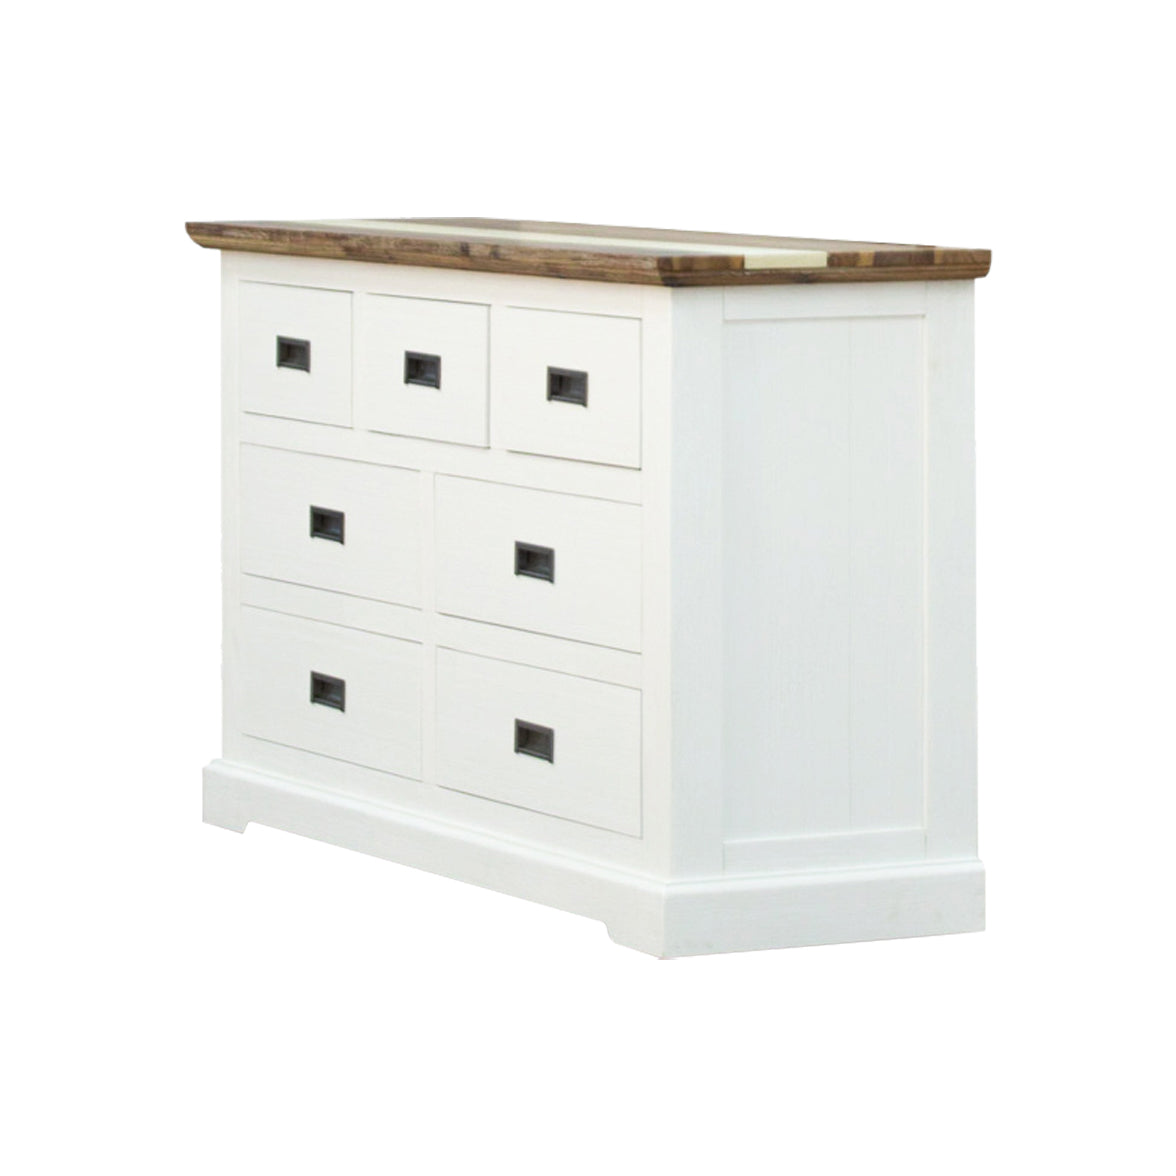 7 Chest of Drawers Solid Wood Storage Cabinet - Multi Color